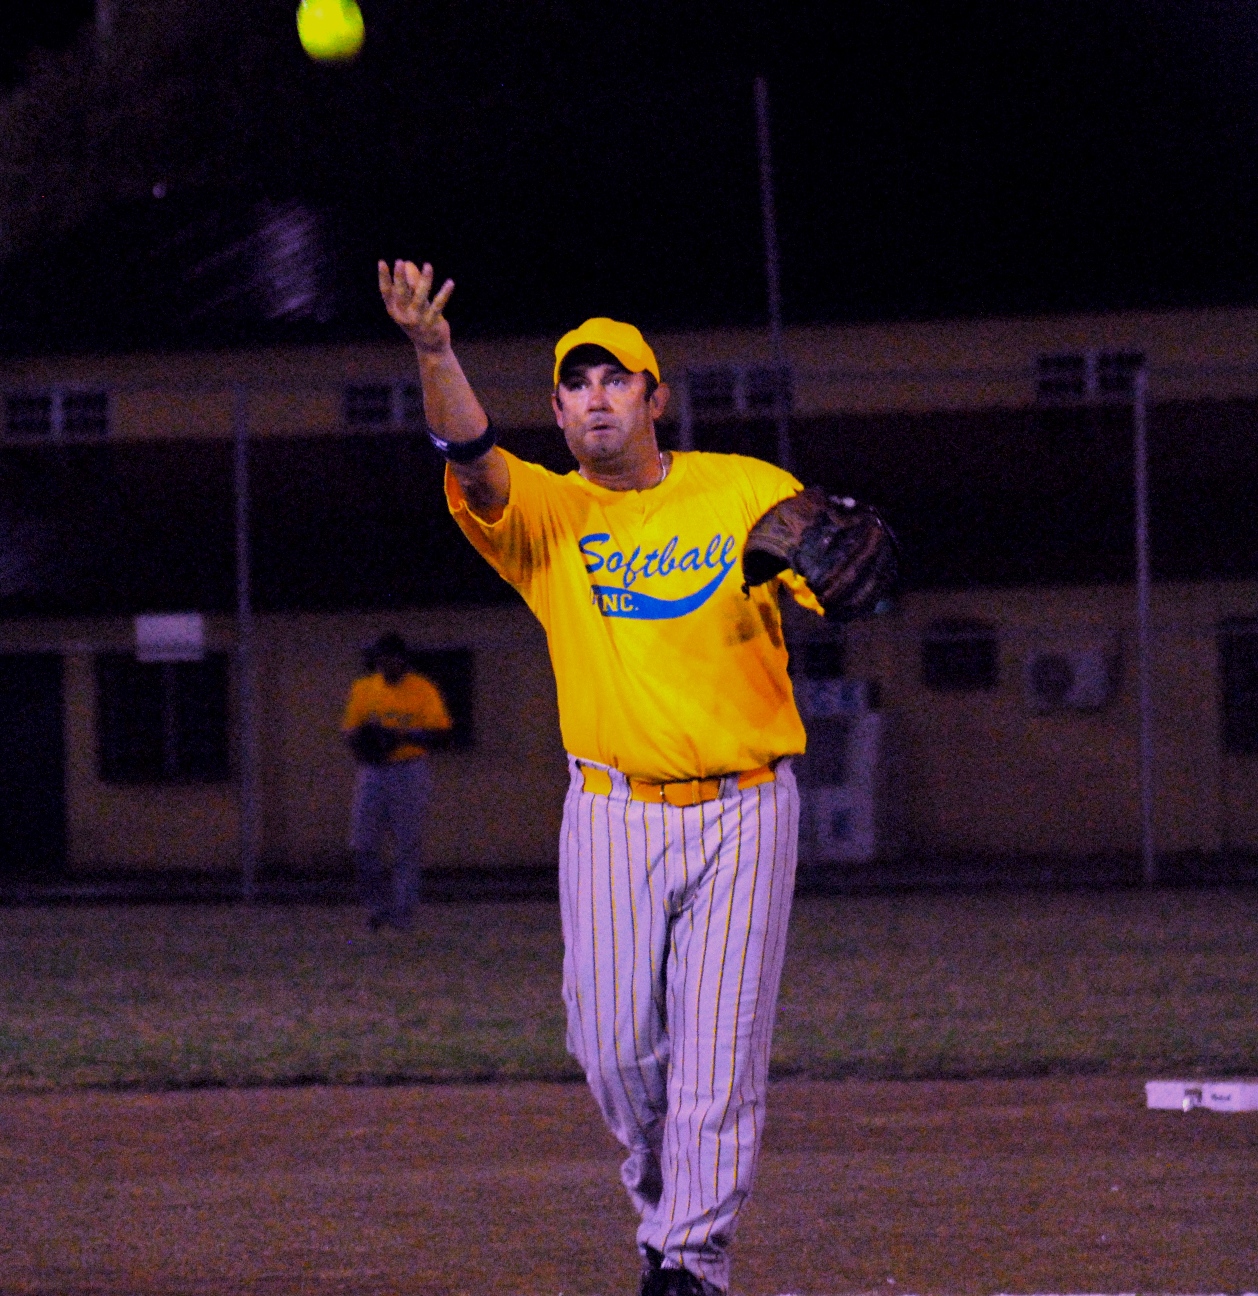 Softball Inc’s Cody St. Pierre helped his team on the mound and at the plate.